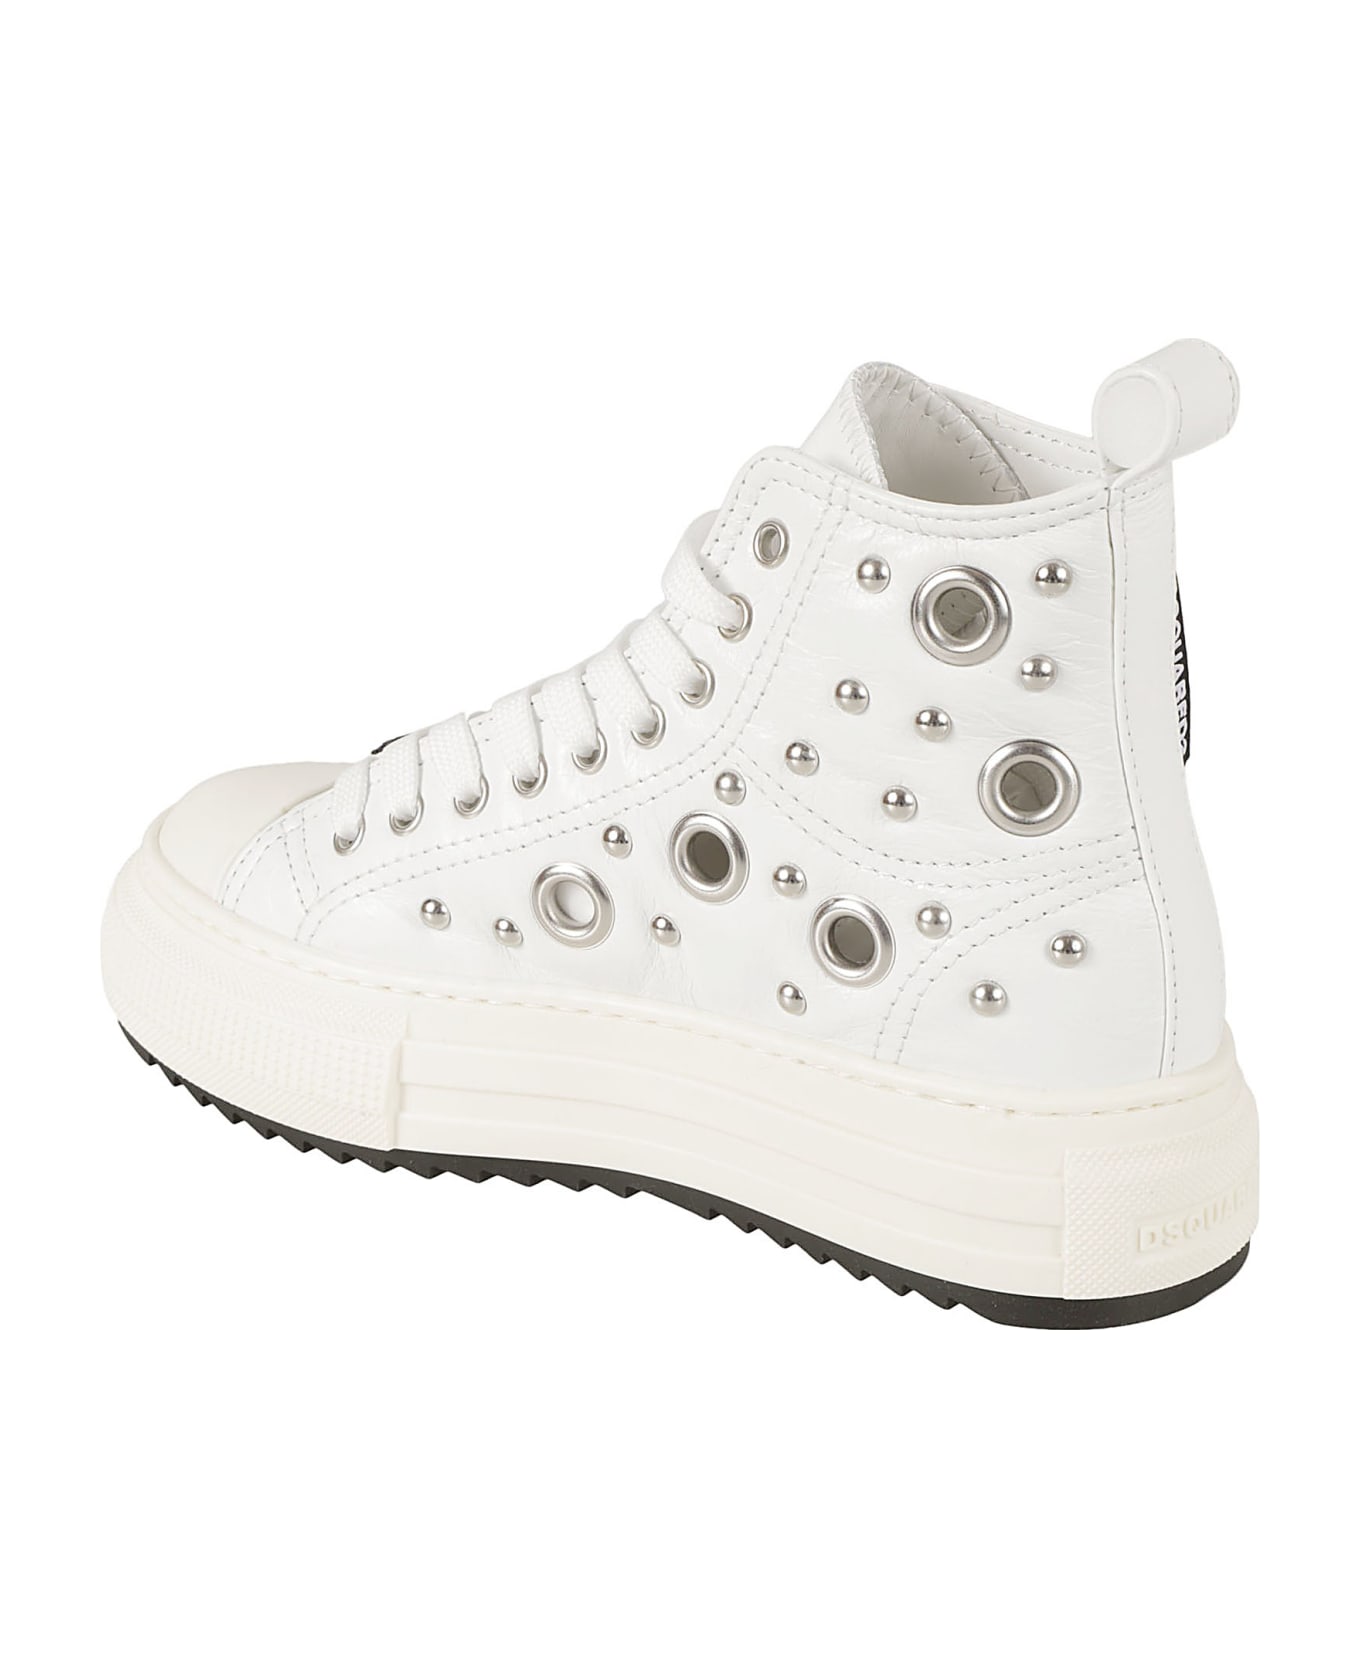 Dsquared2 Berlin Sneakers - White